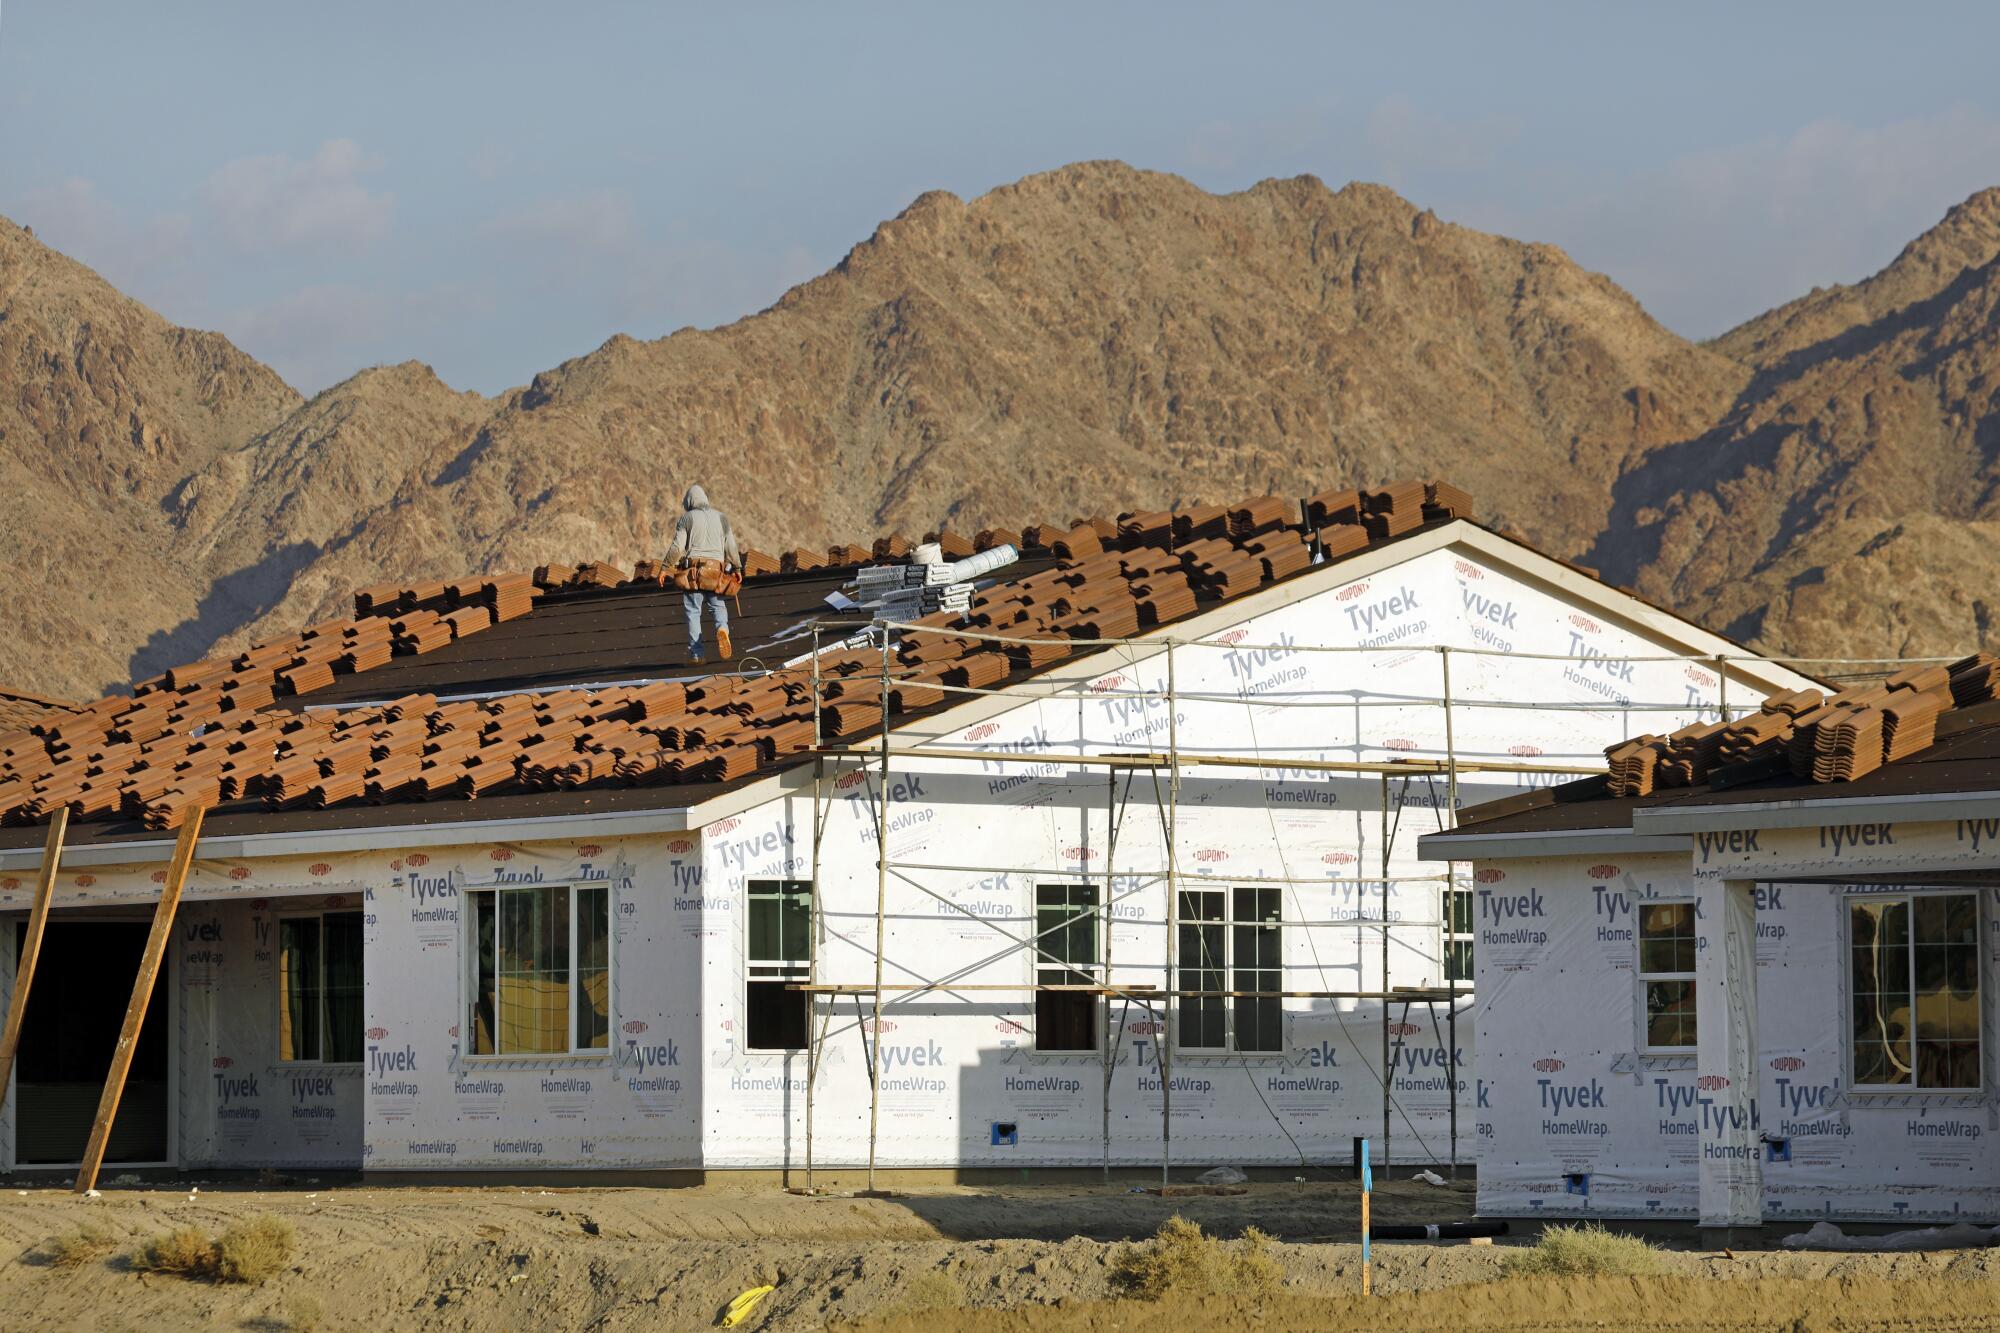 Construction on a house in the desert.